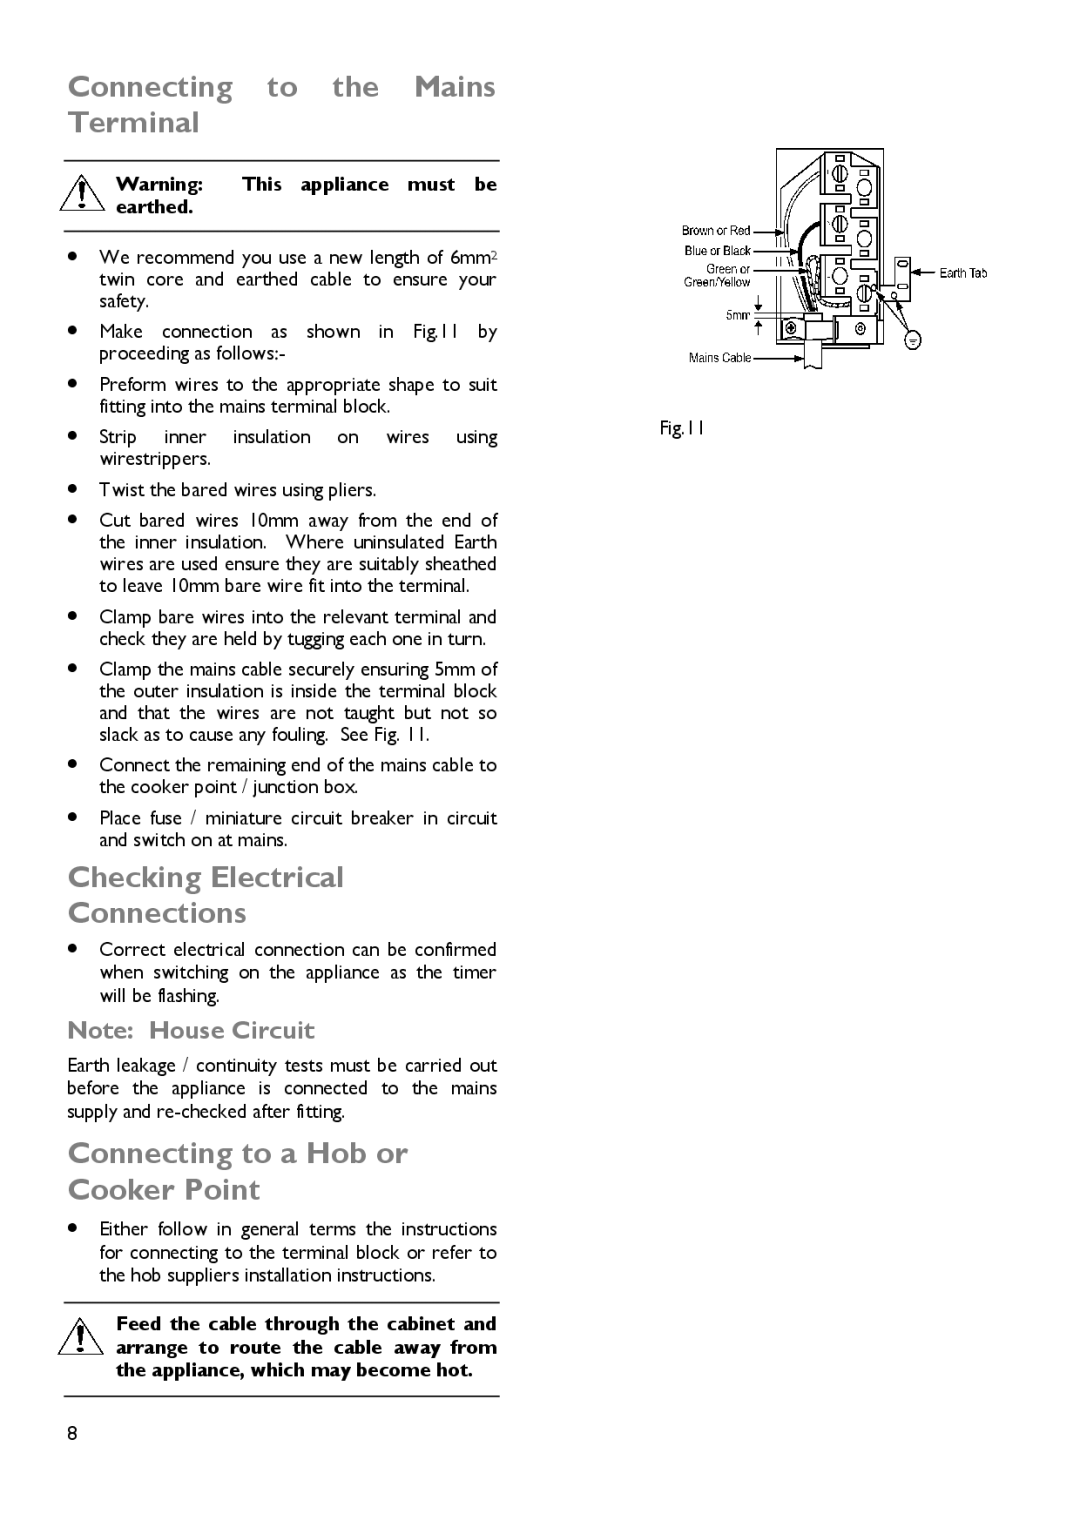 John Lewis JLDUOS705 instruction manual Connecting to the Mains Terminal, Checking Electrical Connections 